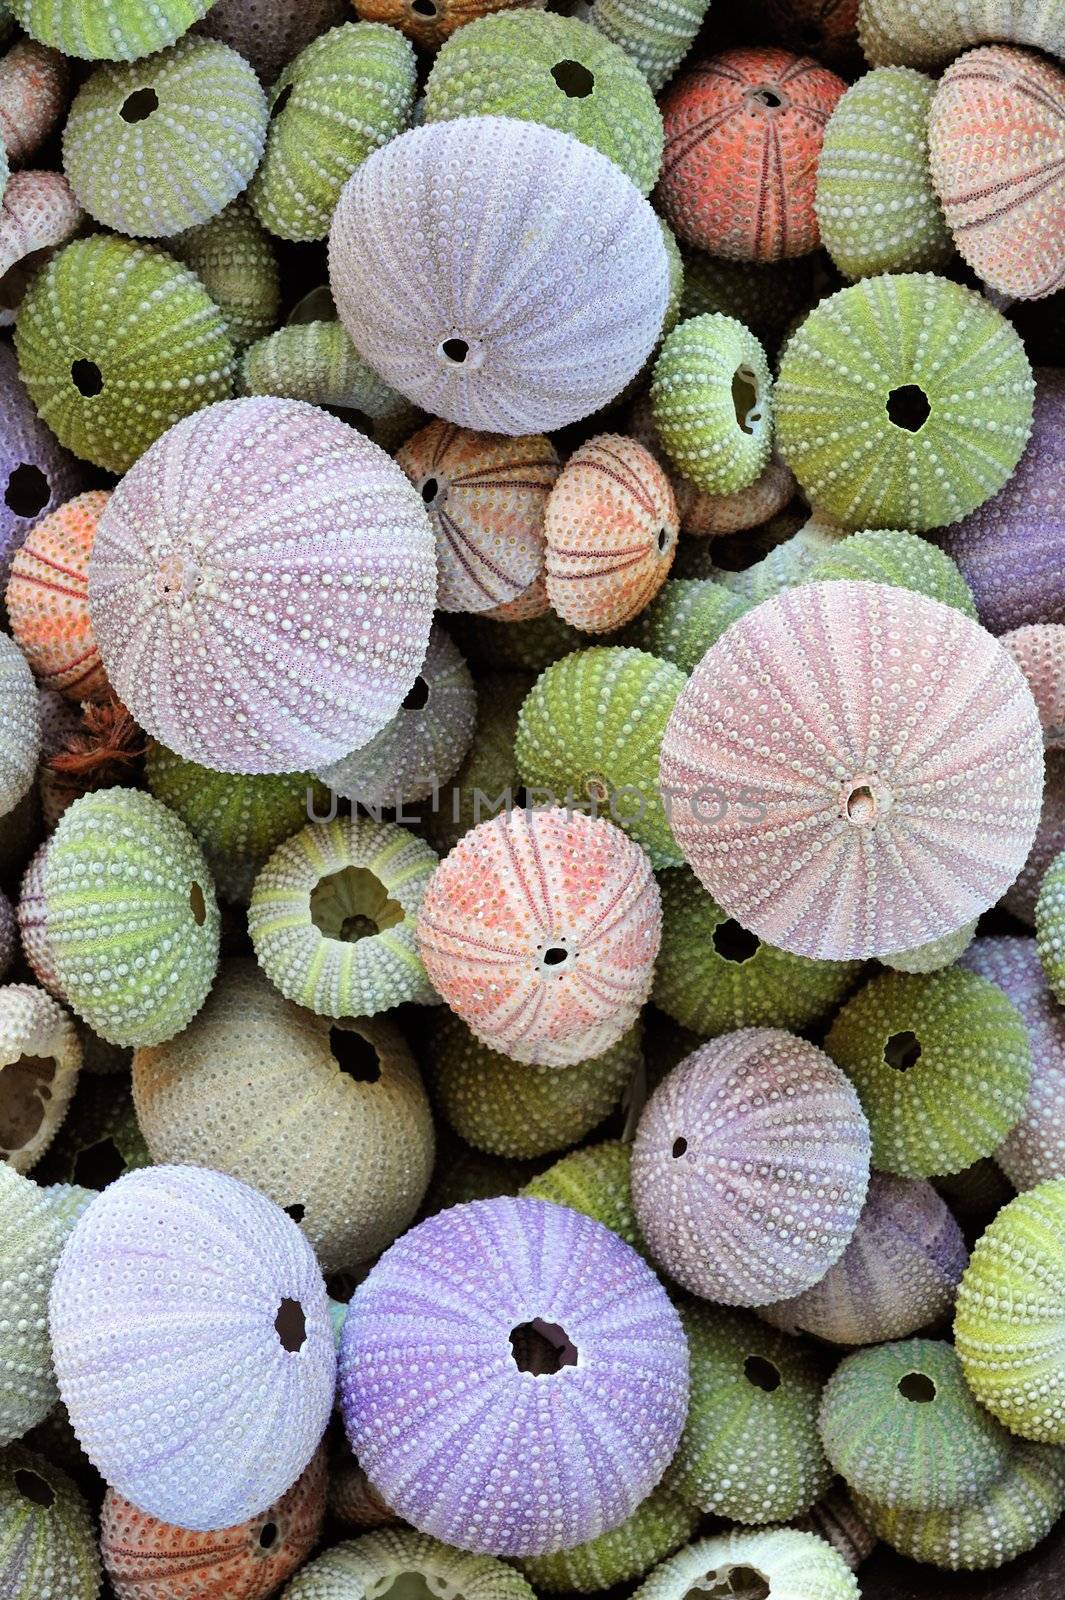 Colorful collection of sea urchin shells with a variety of sizes